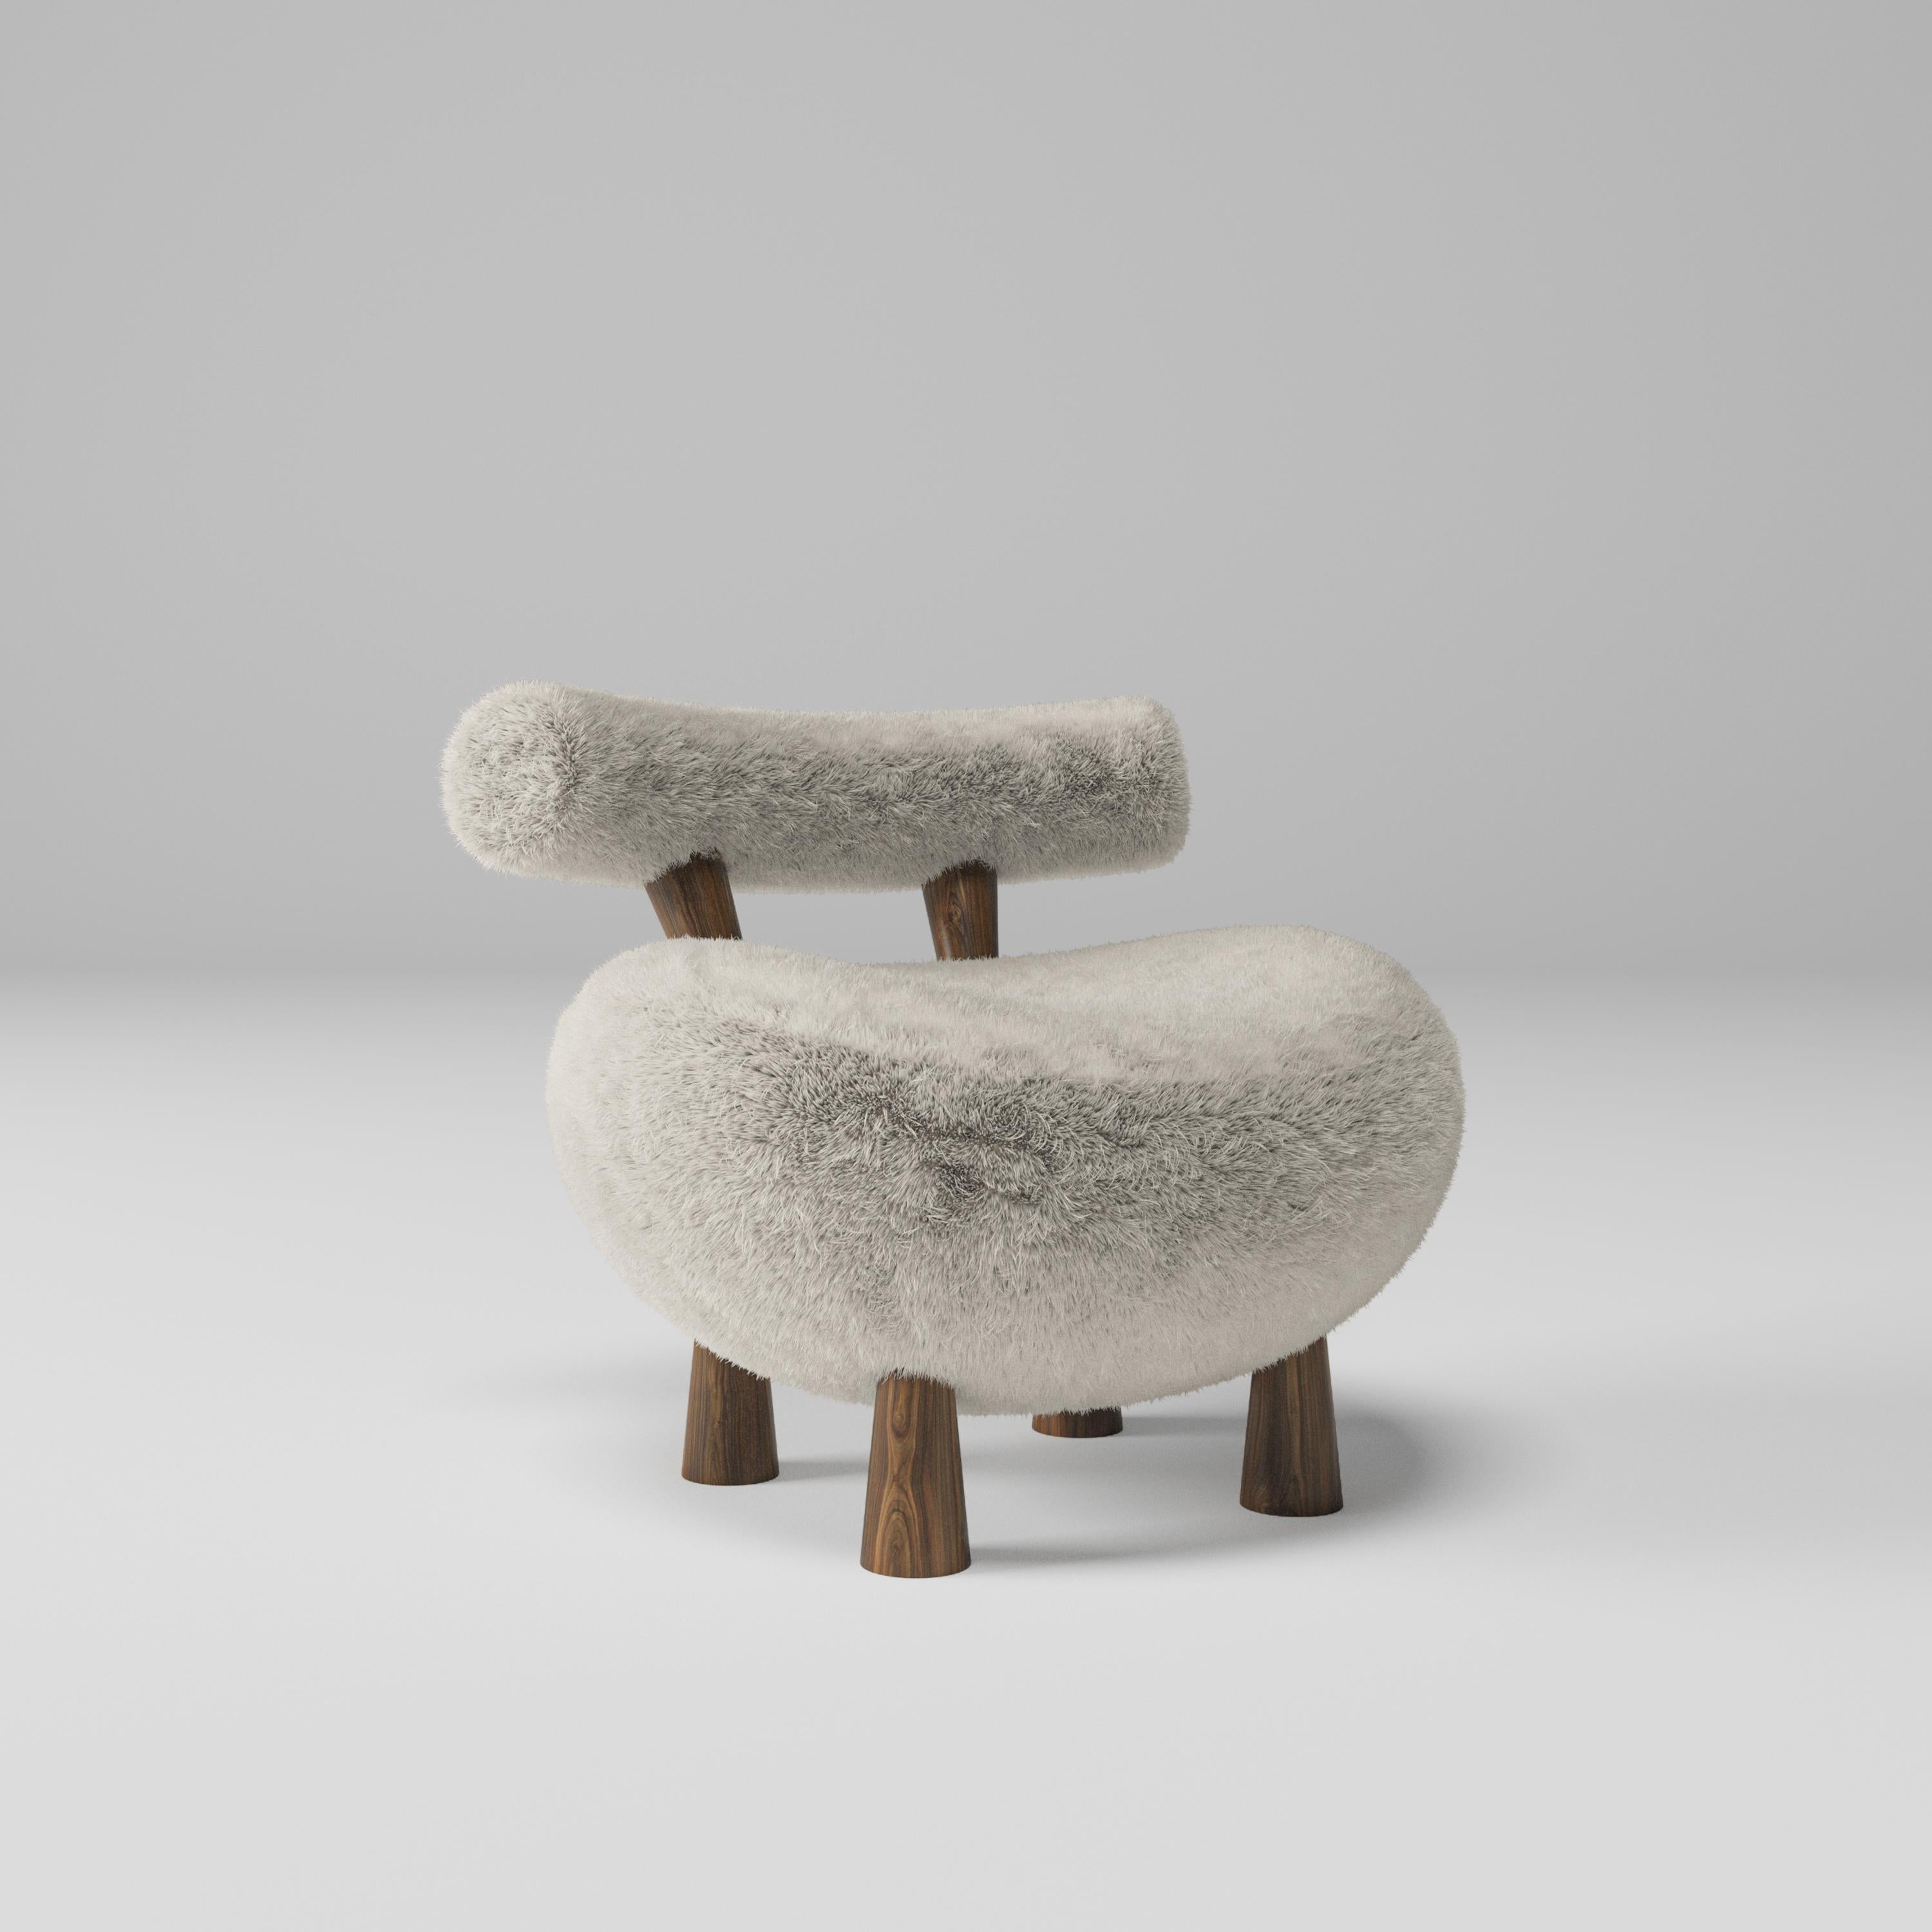 Lamb armchair

Lamb berjer is a one-of-a-kind piece of furniture designed by Mehmet Orel. With a highly organic shape, the Lamb appears to have been bred rather than made. The seat and back are upholstered in a soft, plush fabric that is